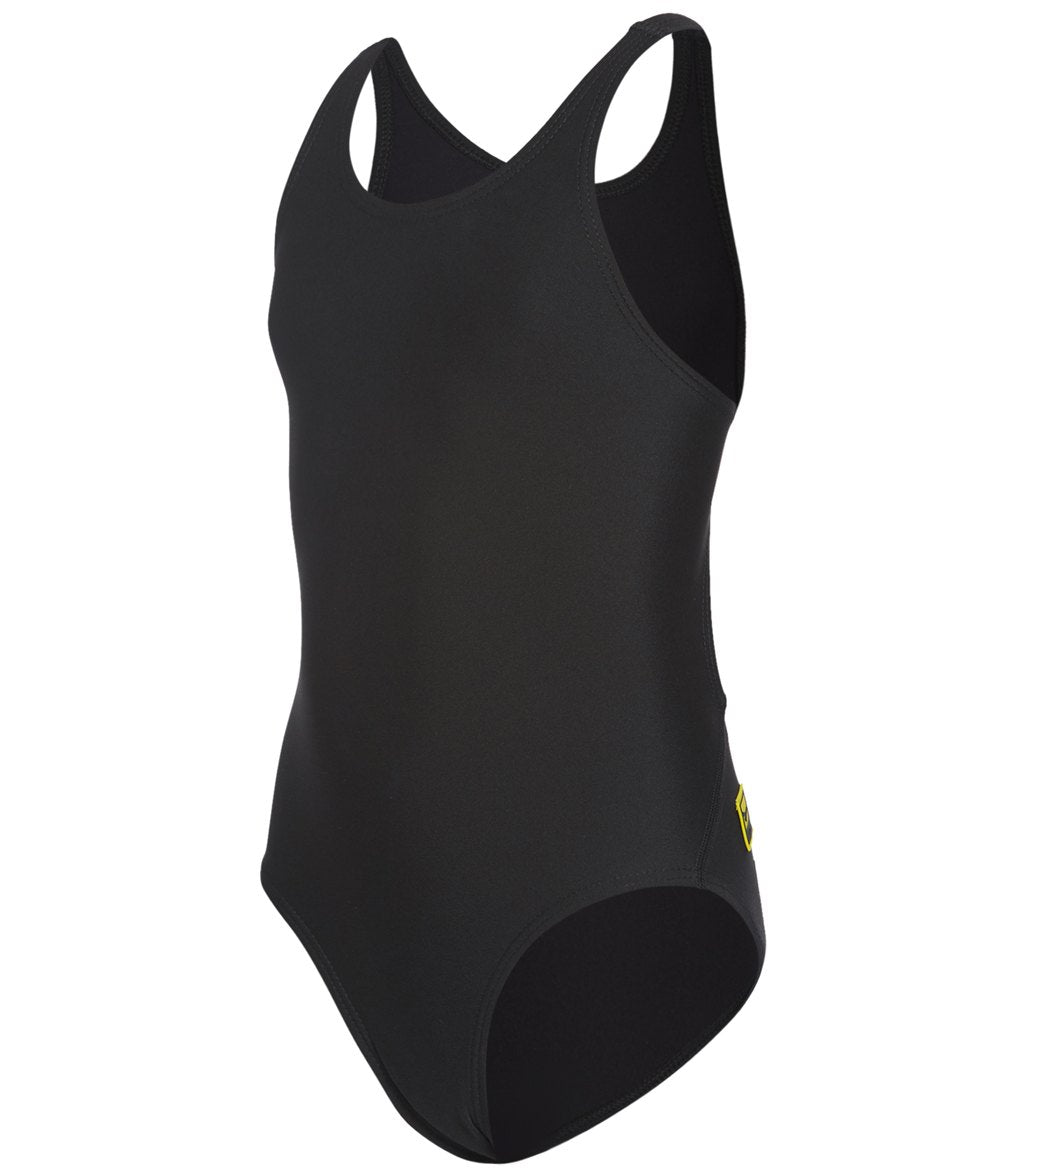 FINIS Girls Bladeback Solid One Piece Swimsuit